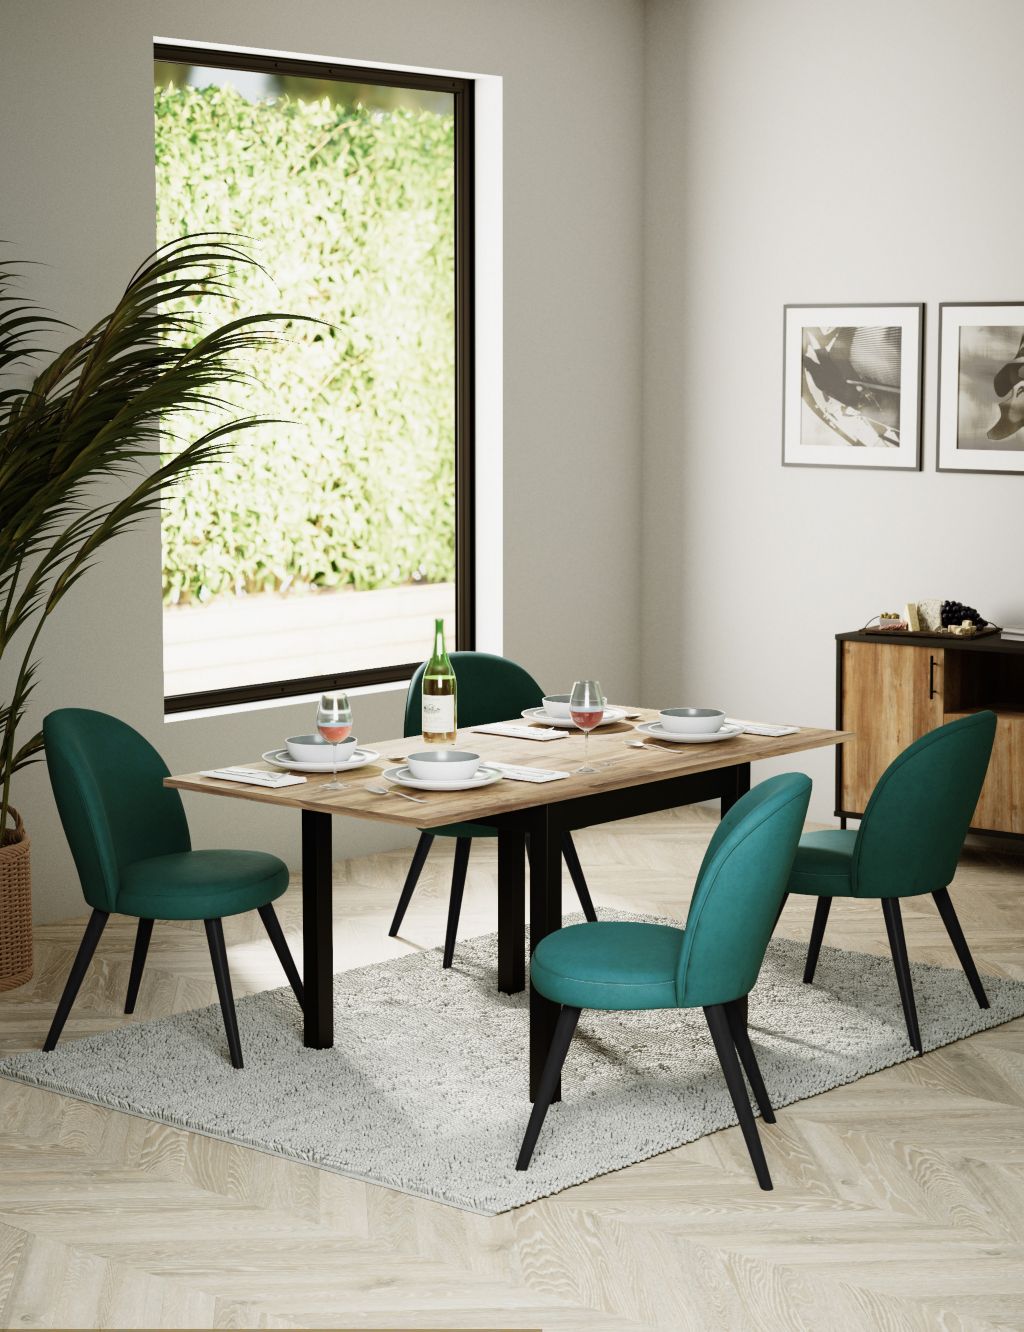 Holt 4-6 Seater Extending Dining Table image 1